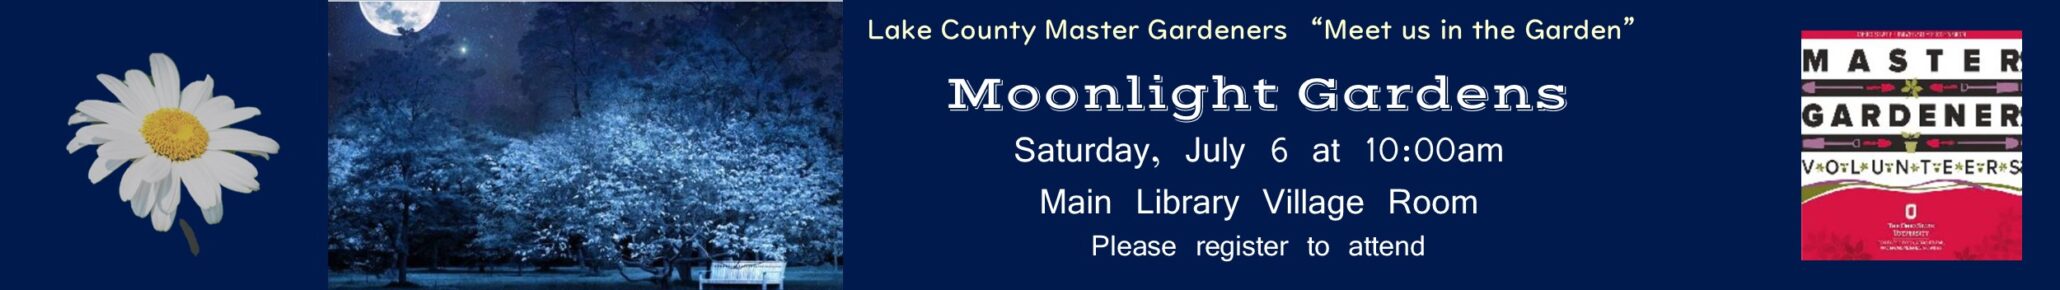 learn about moonlight gardens with the lake county master gardeners on july 6